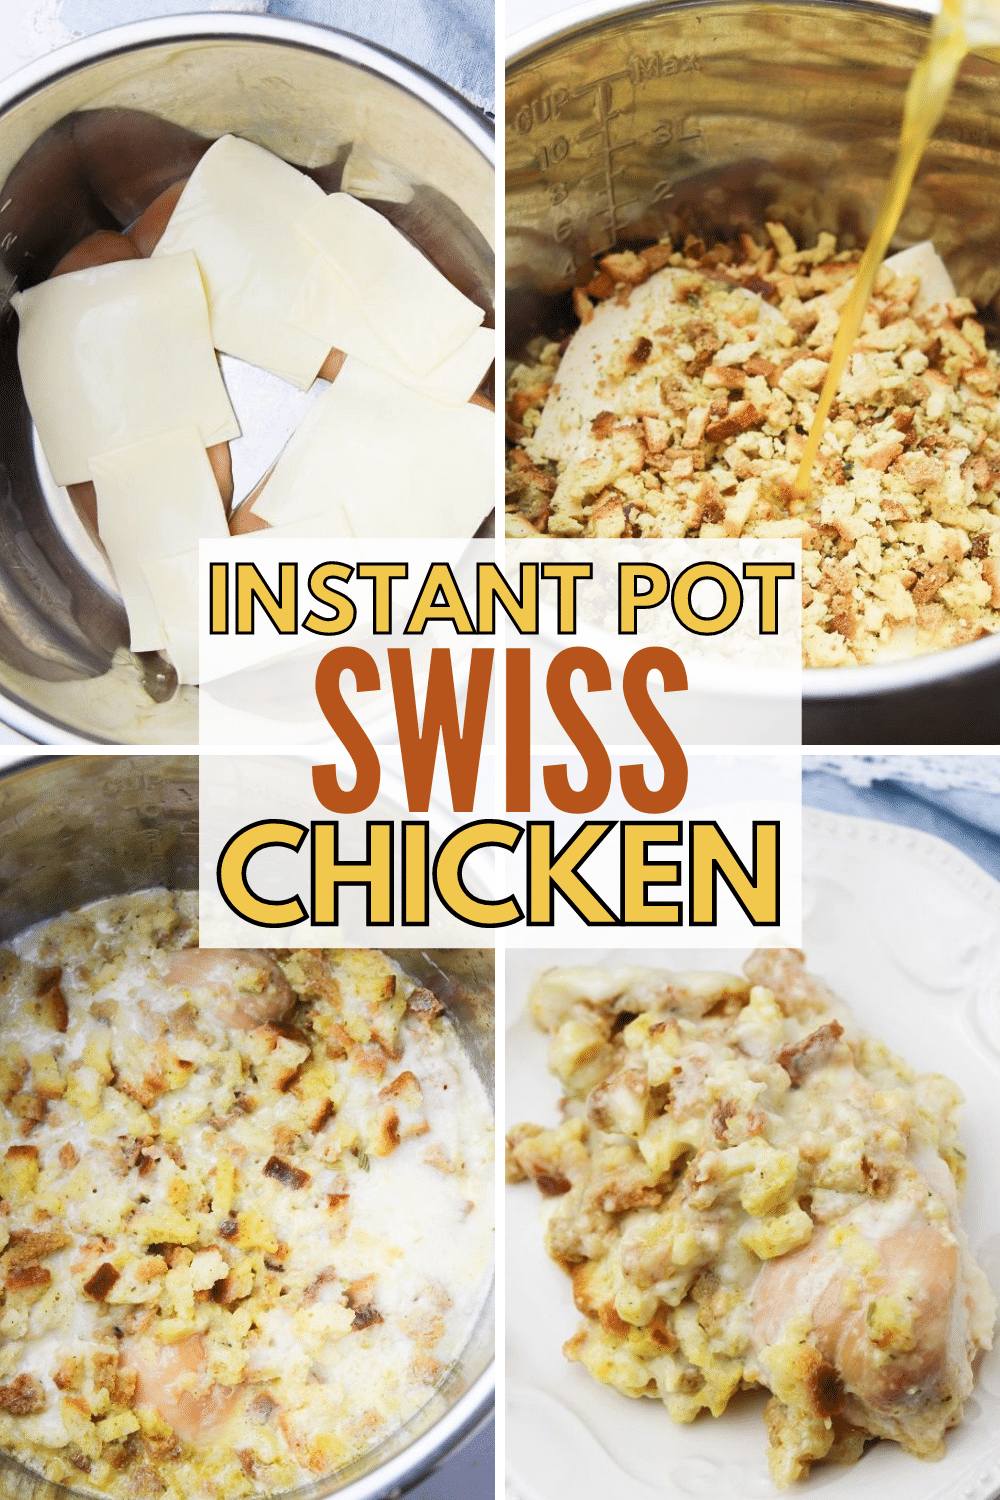 This Instant Pot Swiss Chicken is a family favorite and SO easy to make! #instantpotrecipes #pressurecooker #chicken #dinner via @wondermomwannab